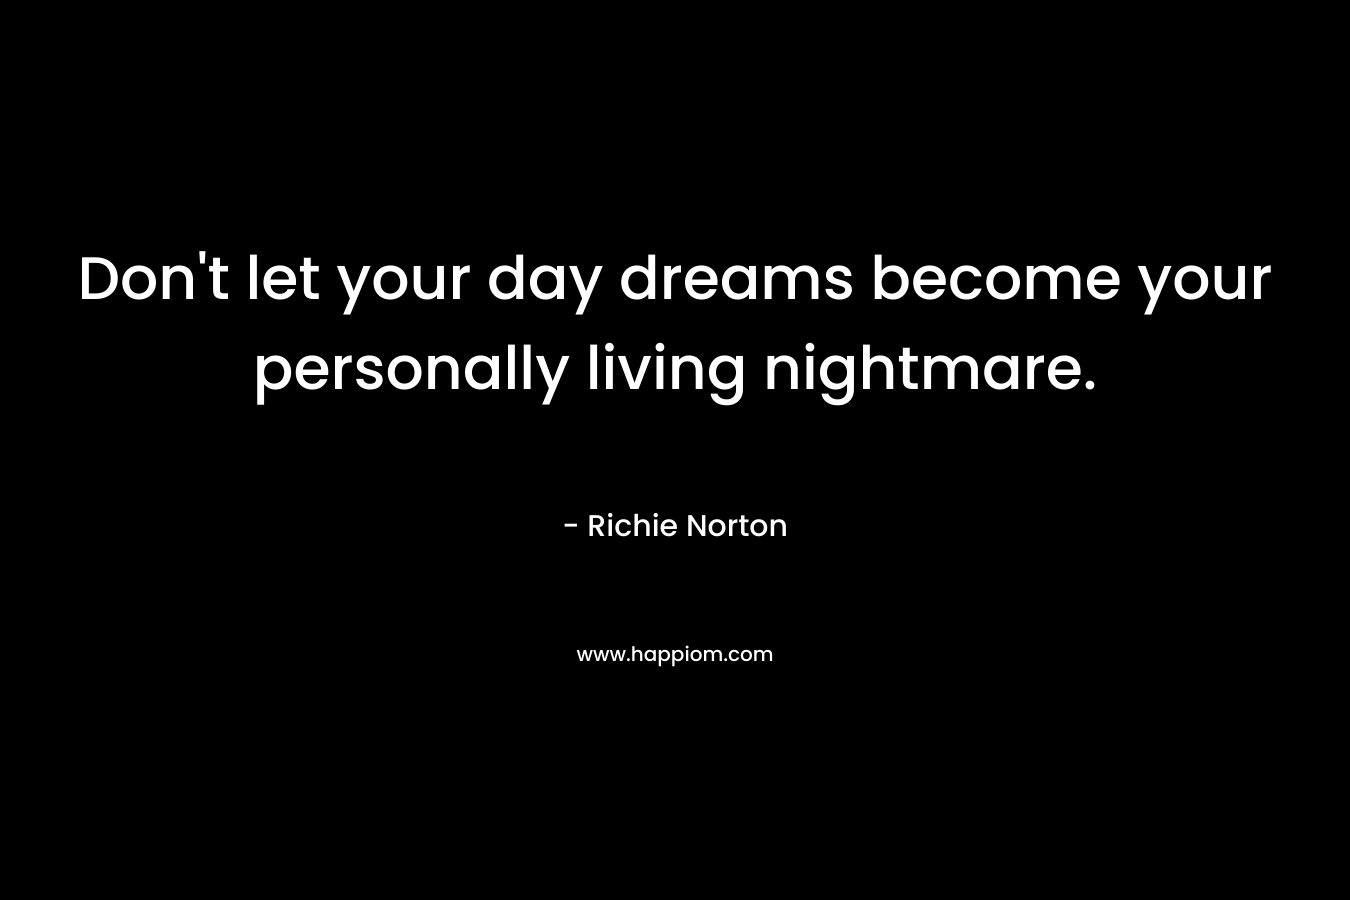 Don't let your day dreams become your personally living nightmare.